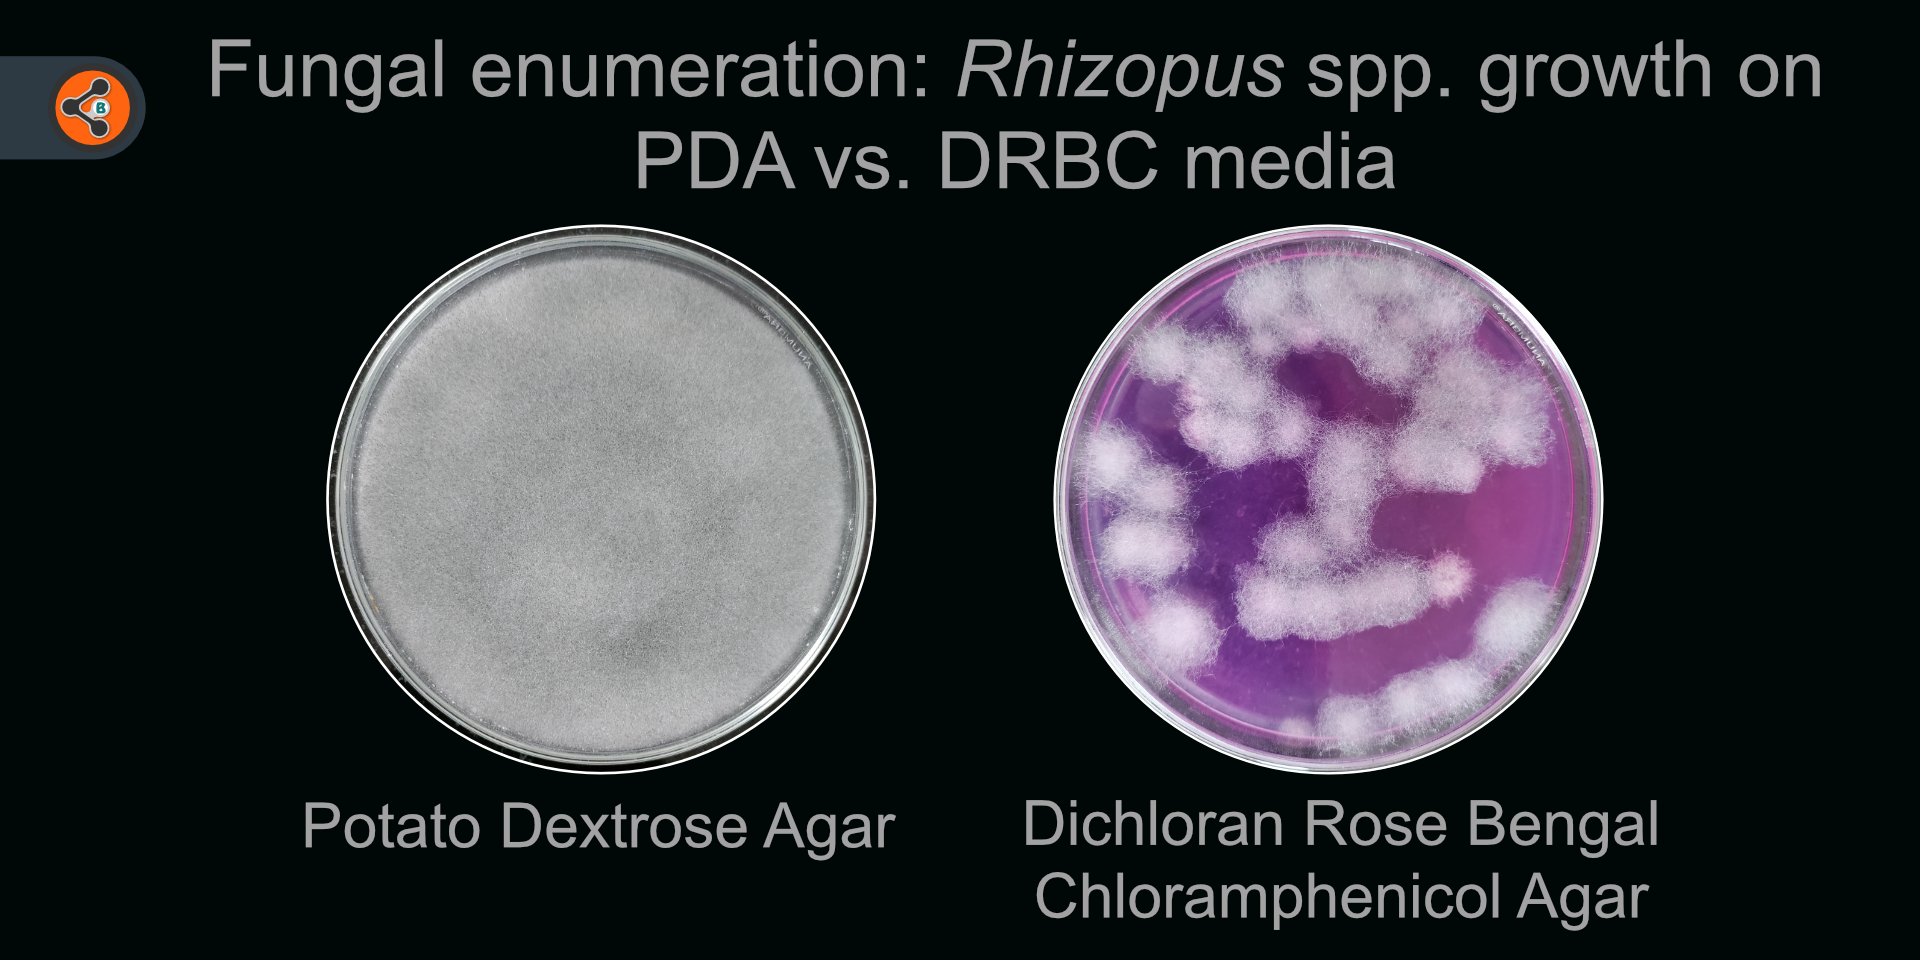 Enumeration of fungi is possible on DRBC media. The image shows growth of Rhizopus spp. as distinct countable units on DRBC media. On the other-hand on PDA, it is spread all over the plate.